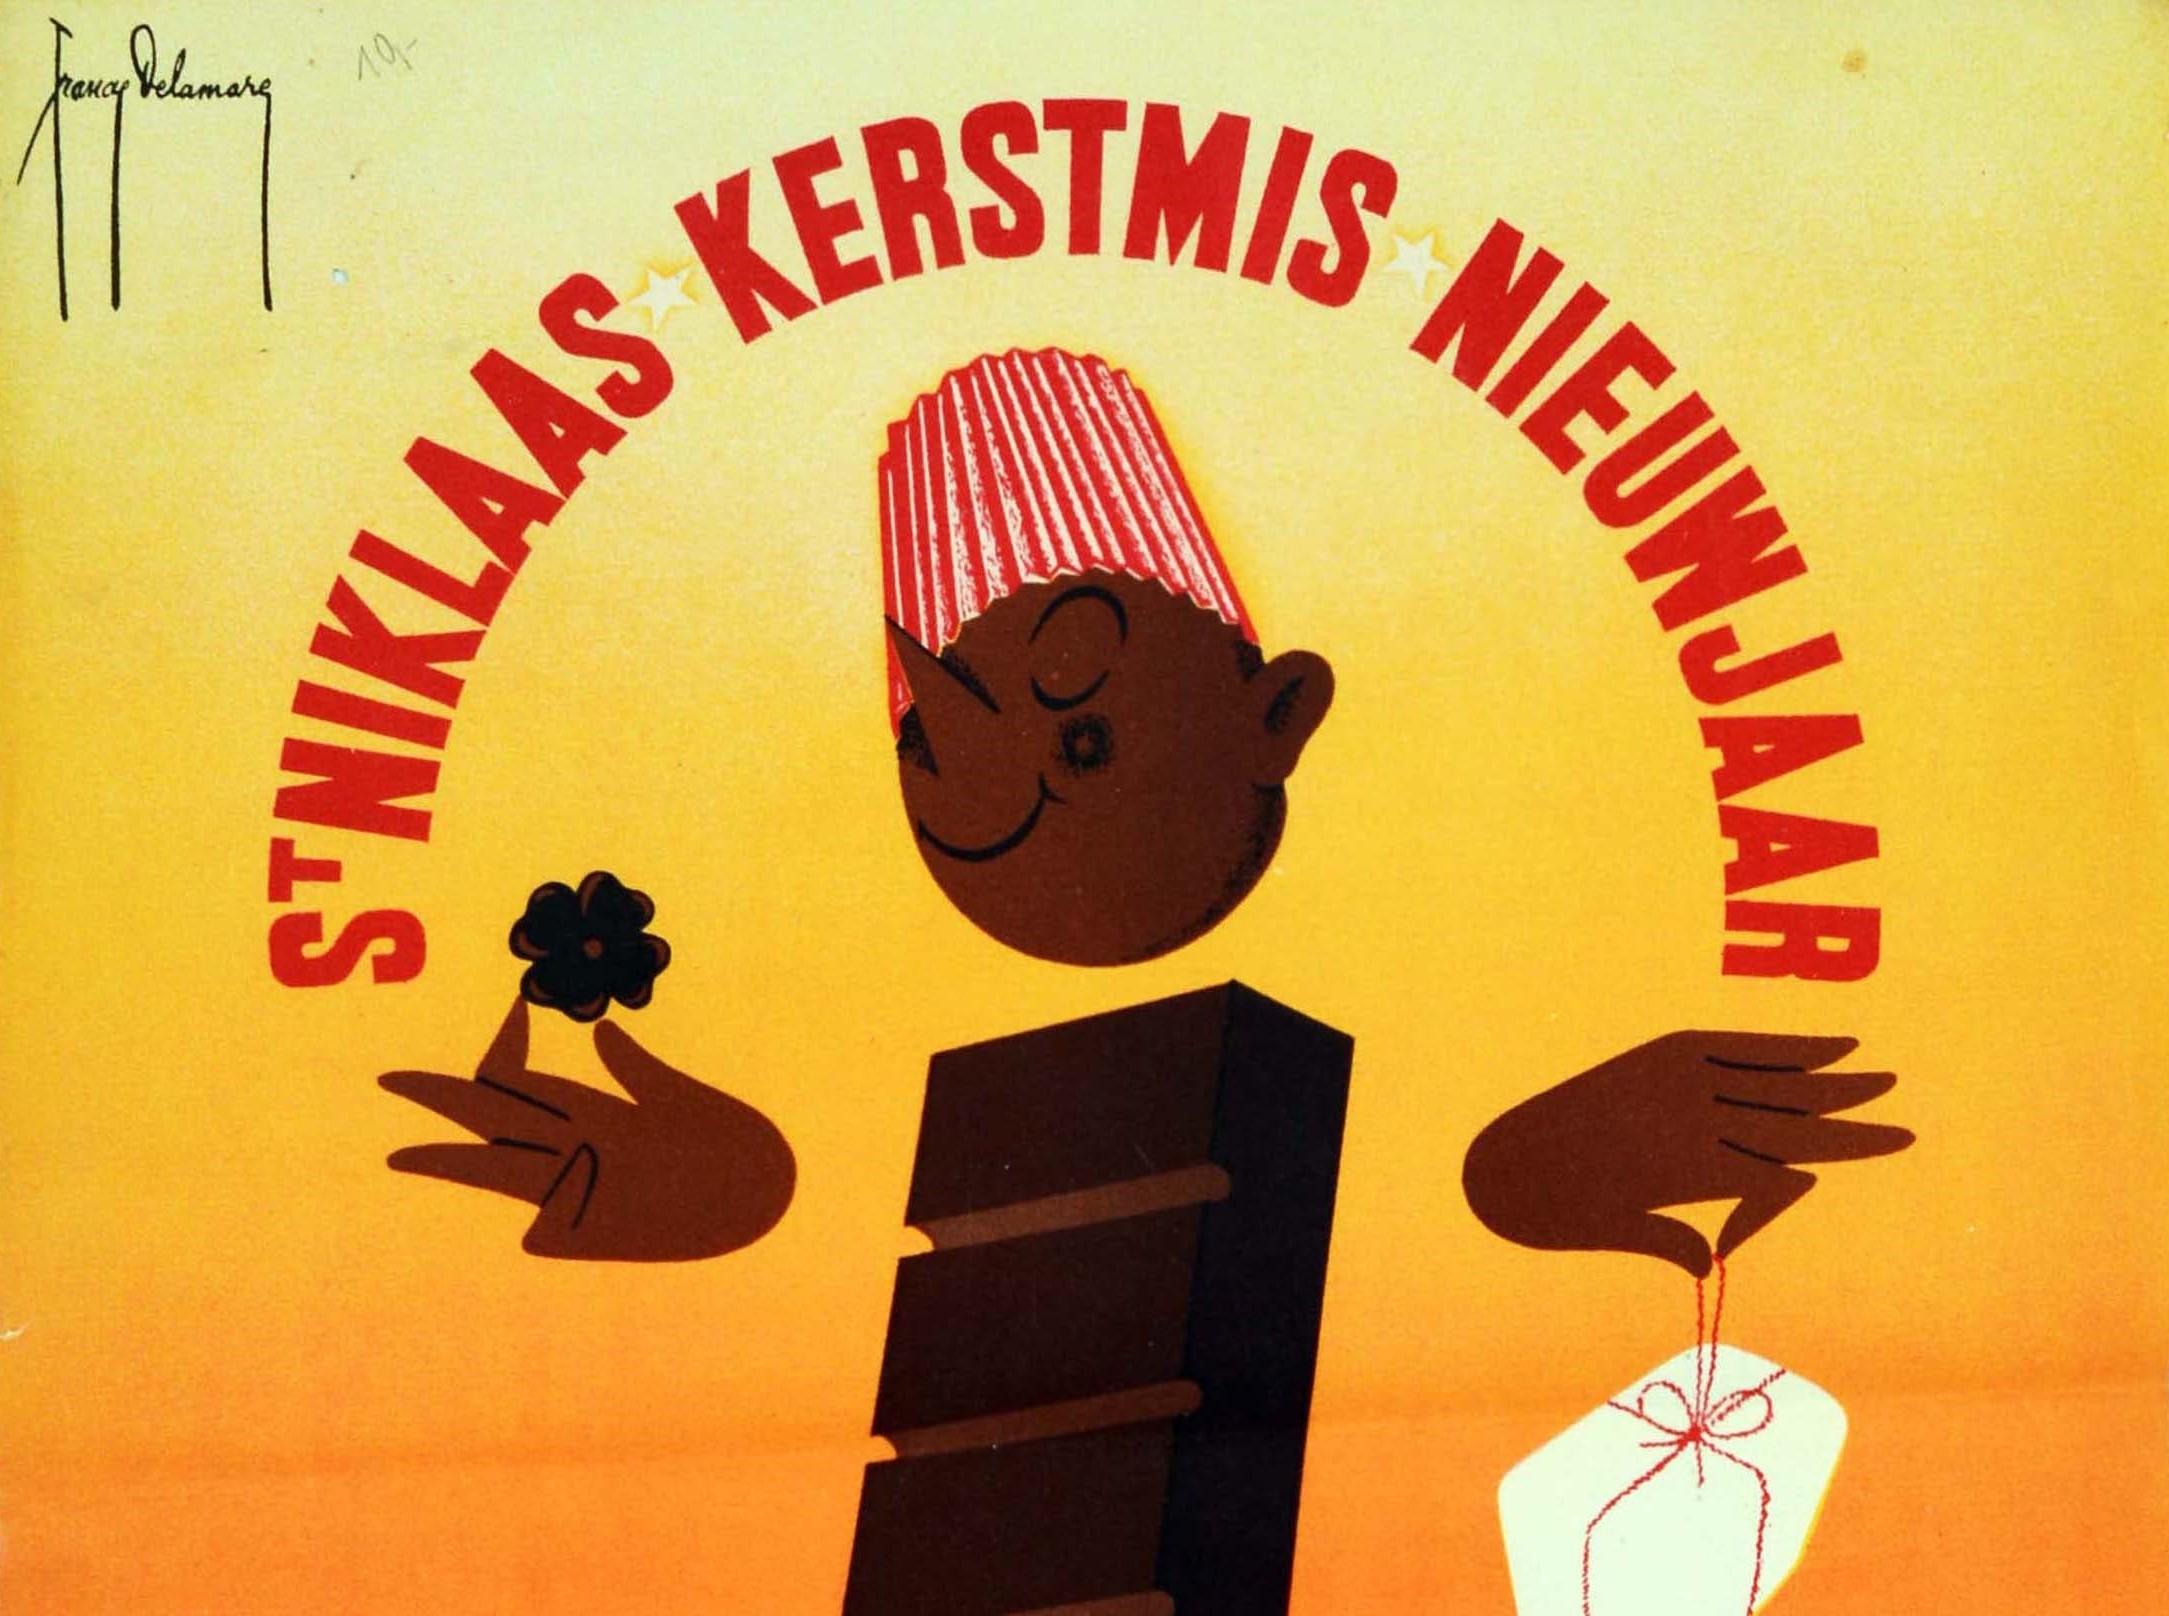 Original vintage food advertising poster for chocolate featuring a fun and colourful mid-century modern design by the Belgian poster artist Francis Delamare (1895-1972) showing stars between the bold red title text - St Niklaas Kerstmis Nieuwjaar /